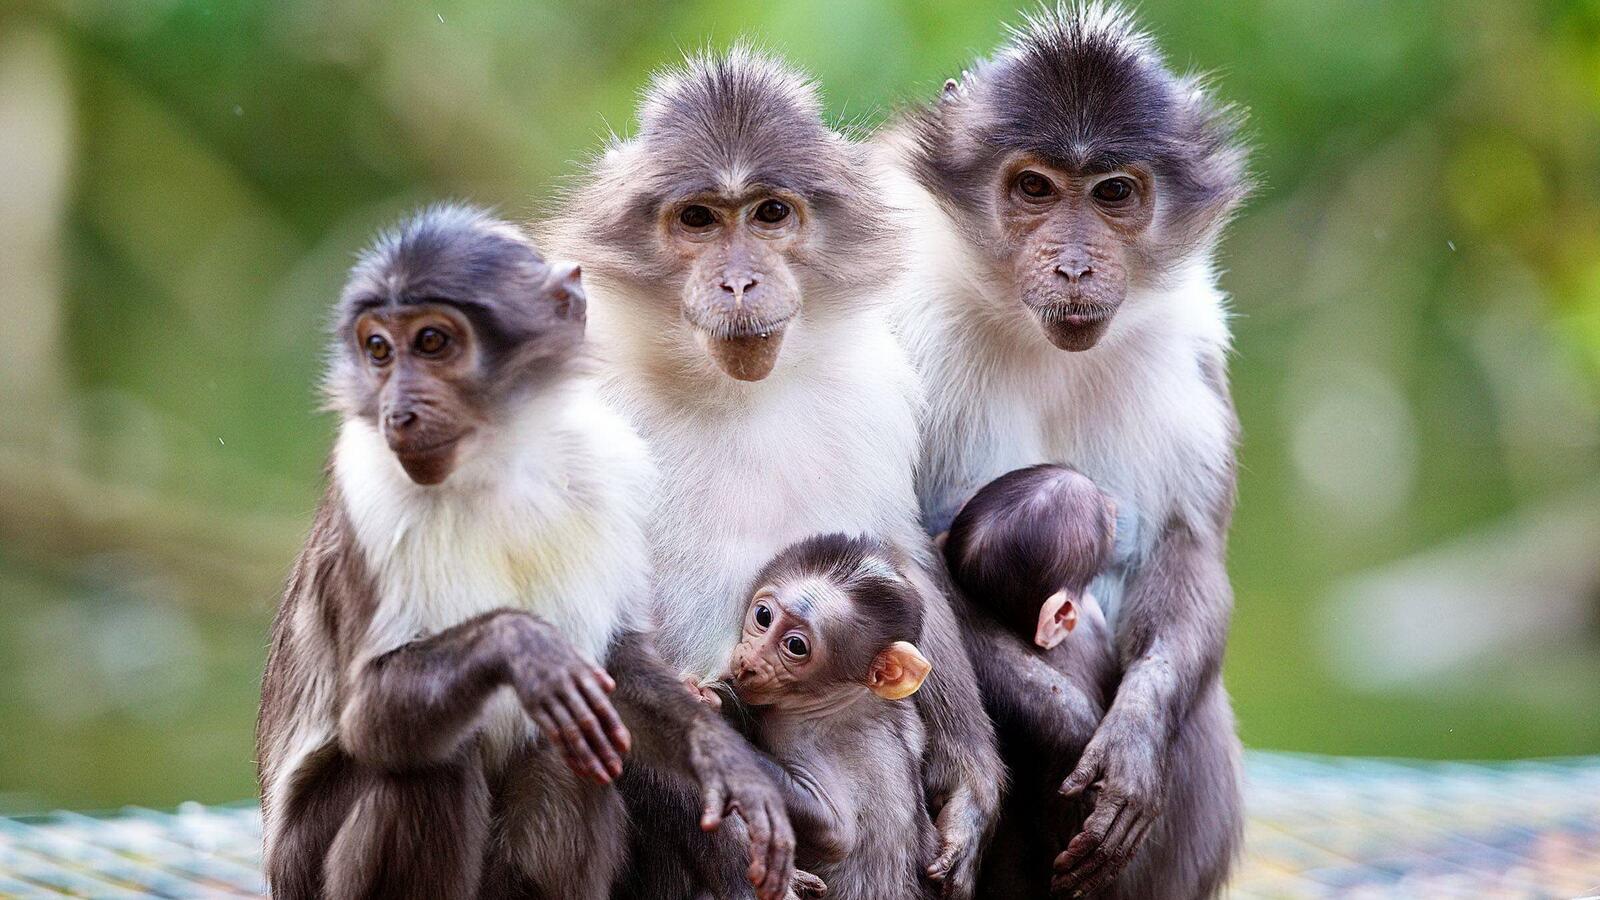 Wallpapers macaques monkeys family on the desktop